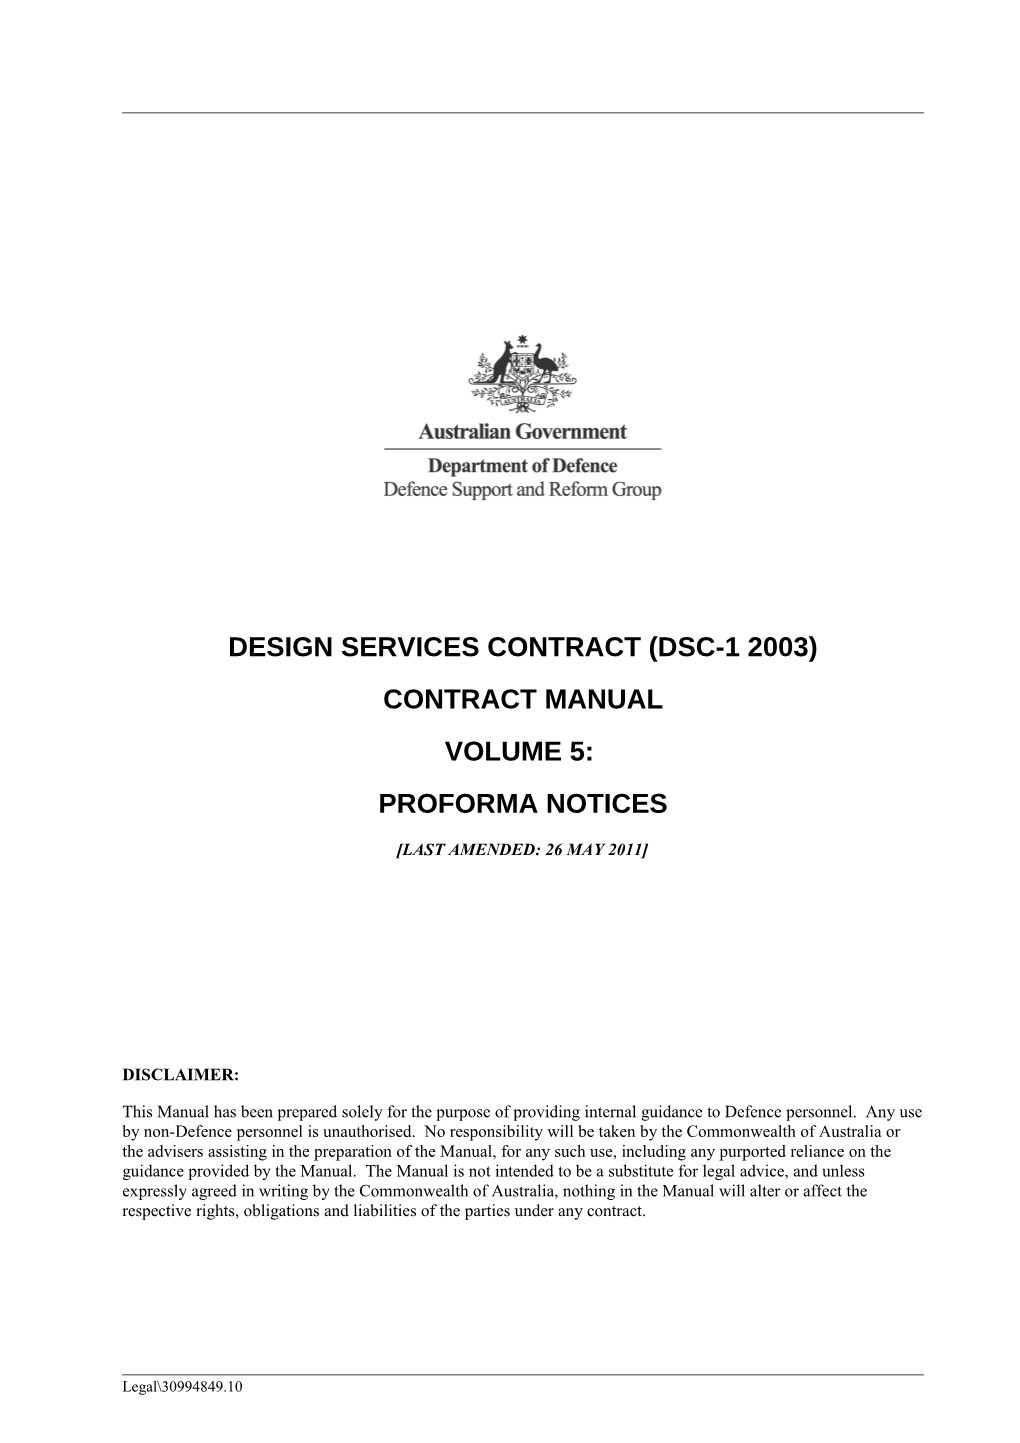 Department of Defence - DSC-1 Contract Manual - Volume 5